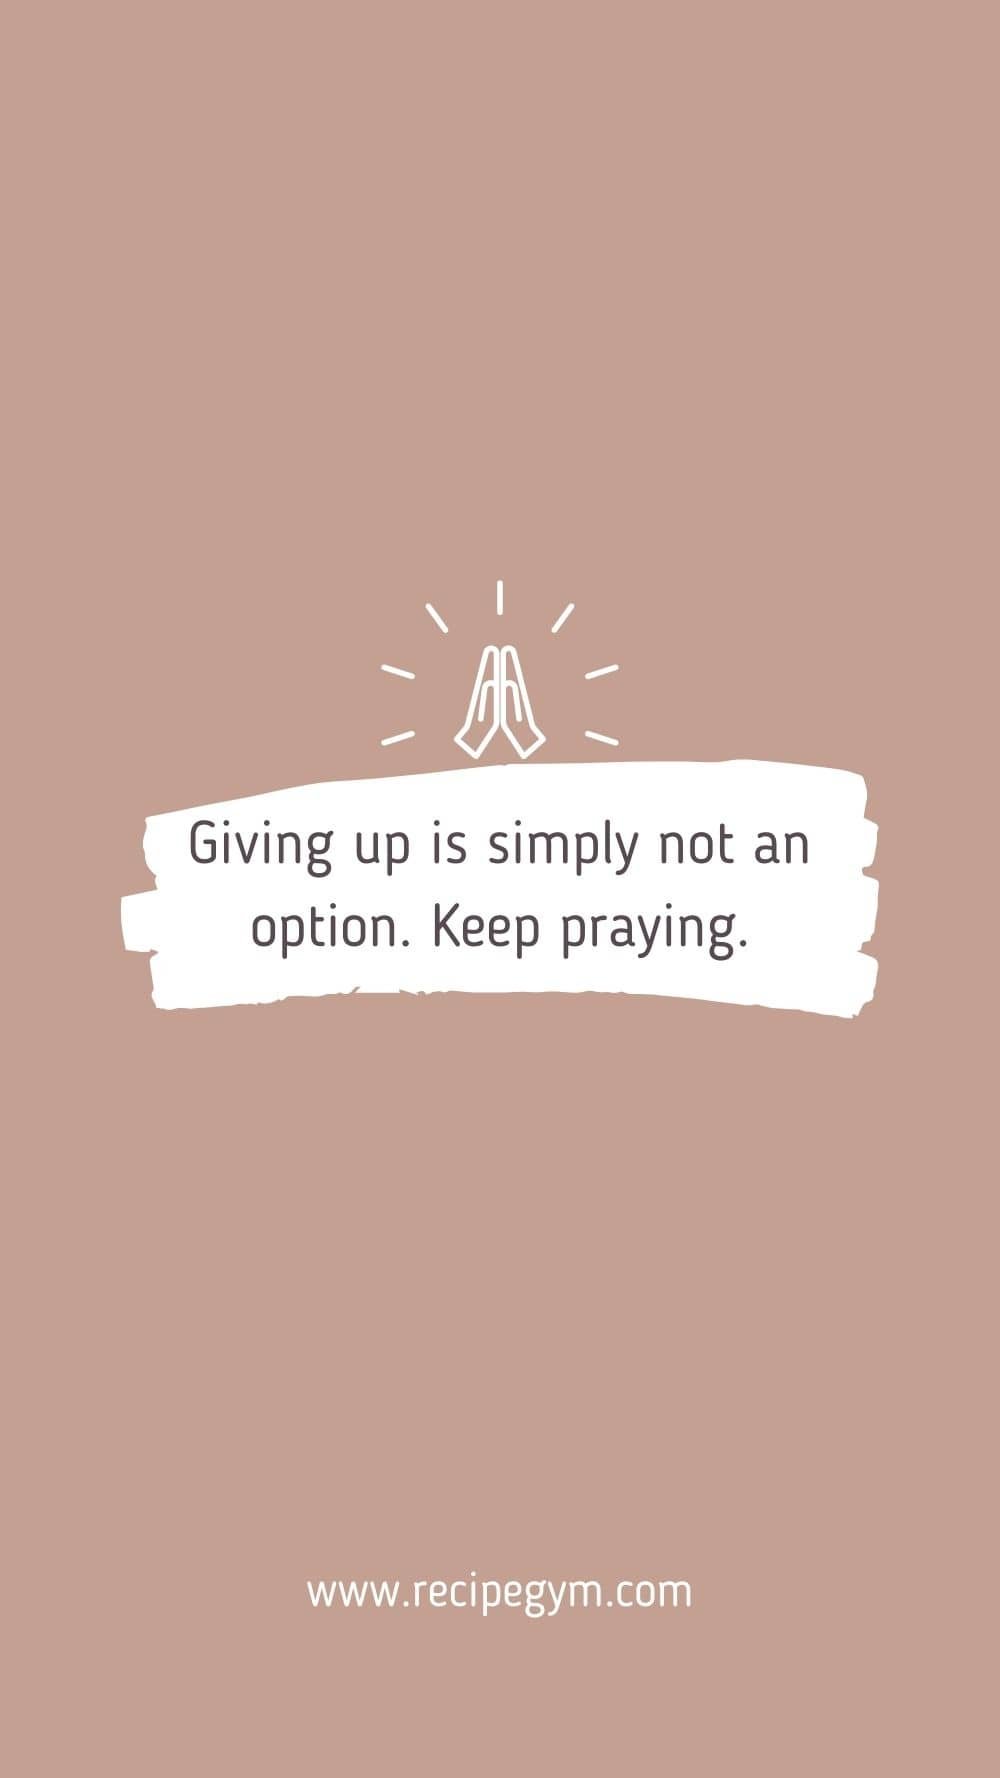 Giving up is simply not an option